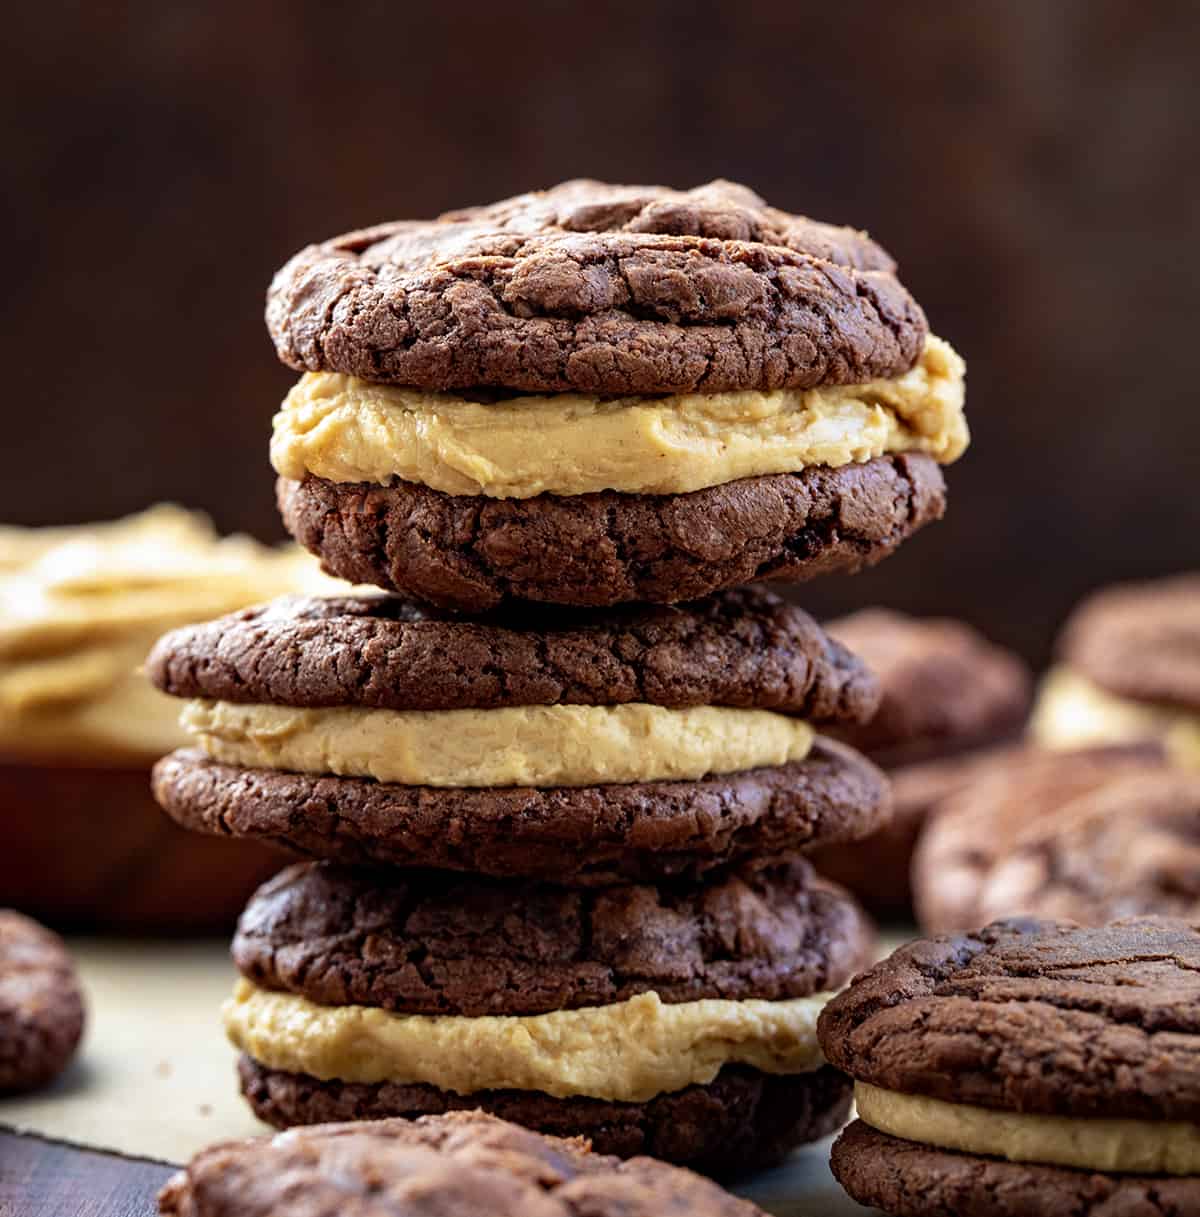 Stacked Chocolate Peanut Butter Sandwich Cookies on a Dark Cutting Board Surrounded by More Cookie Sandwiches.